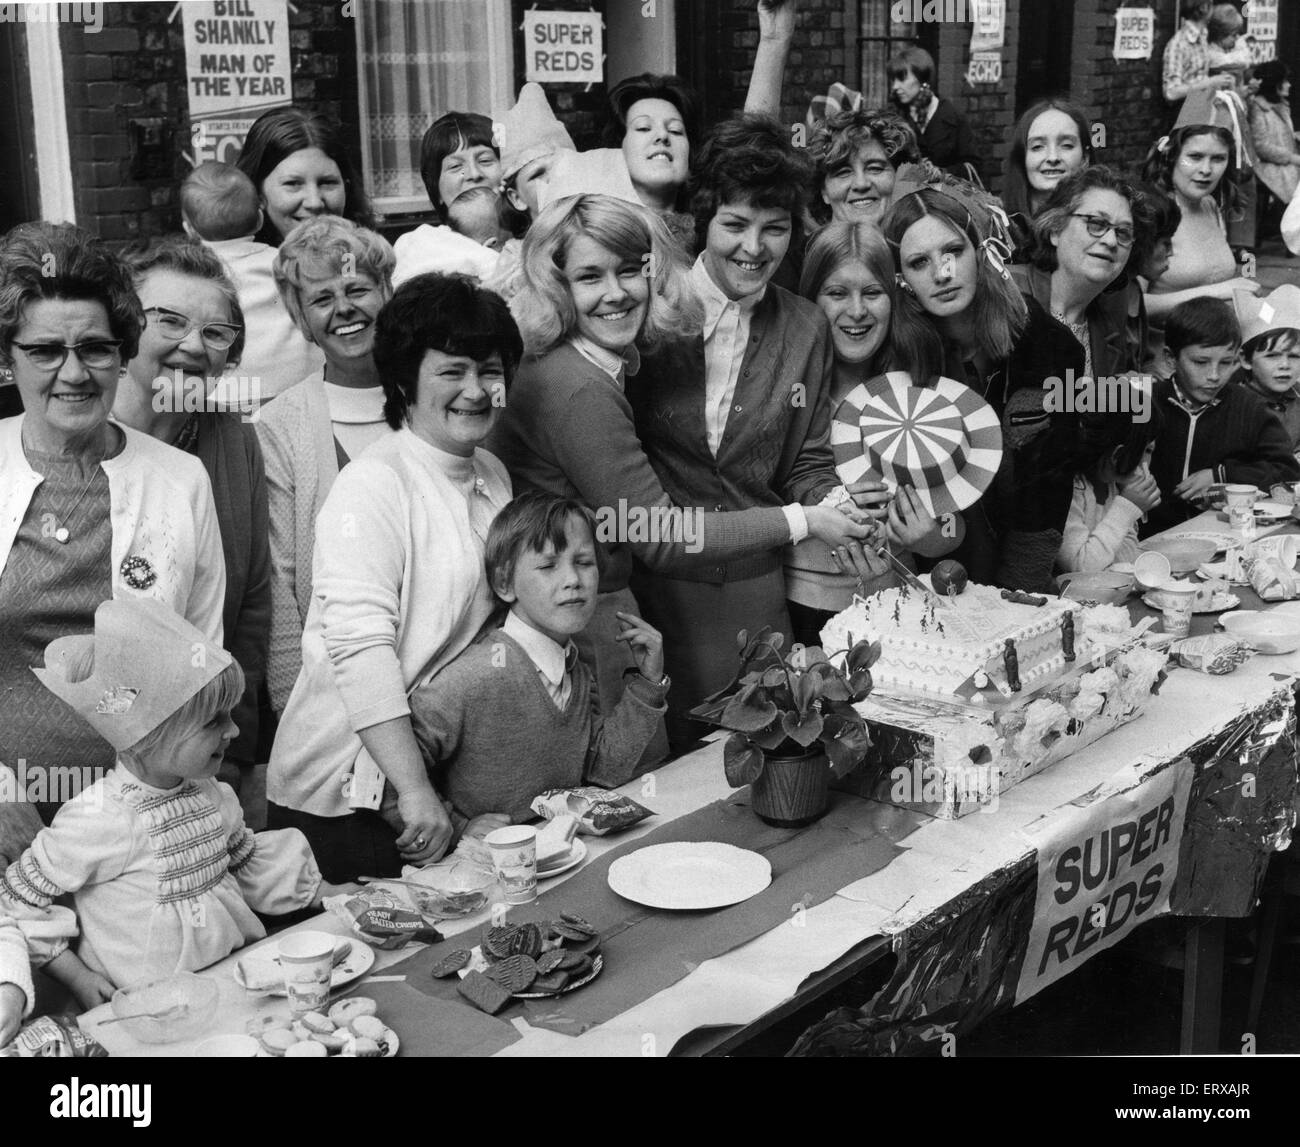 Residents of Paley Street, Anfield, cut a cake to celebrate Liverpool's F.A. cup victory during a street party. 25th May 1976 Stock Photo